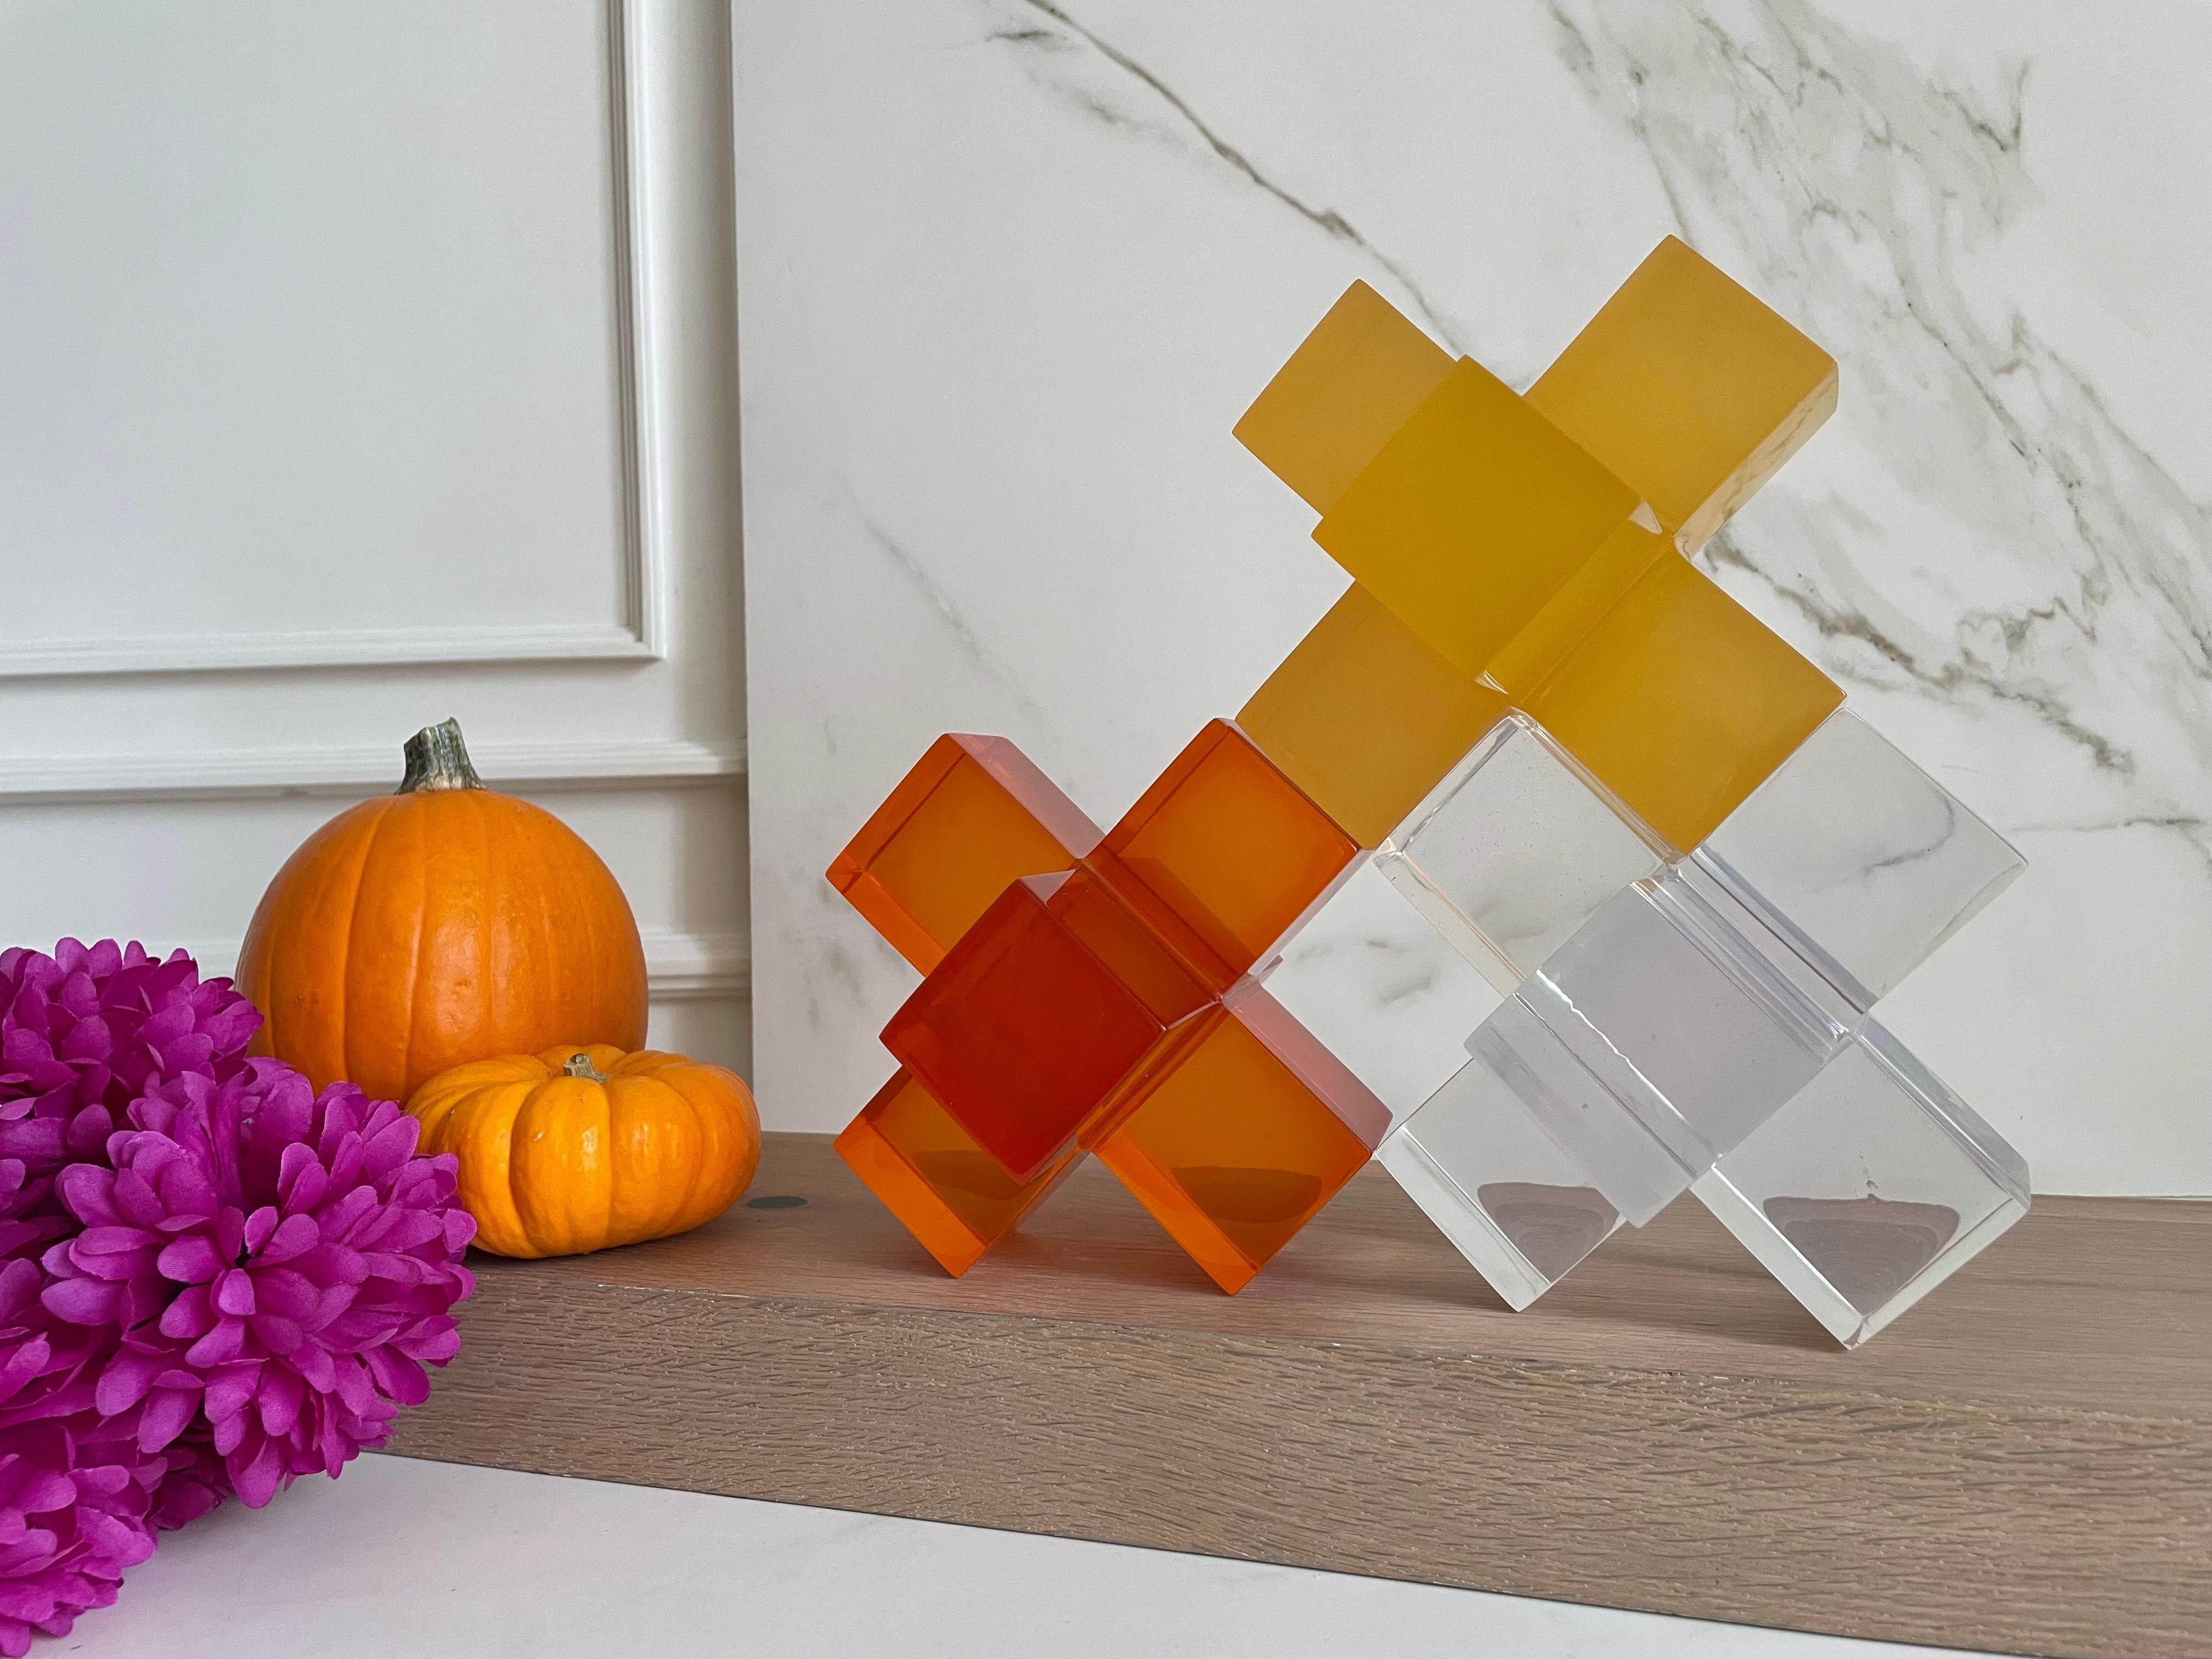 Geometric sculpture made in polished resin in variety of colors. It is a modern and colorful piece that will liven up any space.

This sculpture is very versatile and fun! You can create a different sculpture just by stacking up to three pieces.We